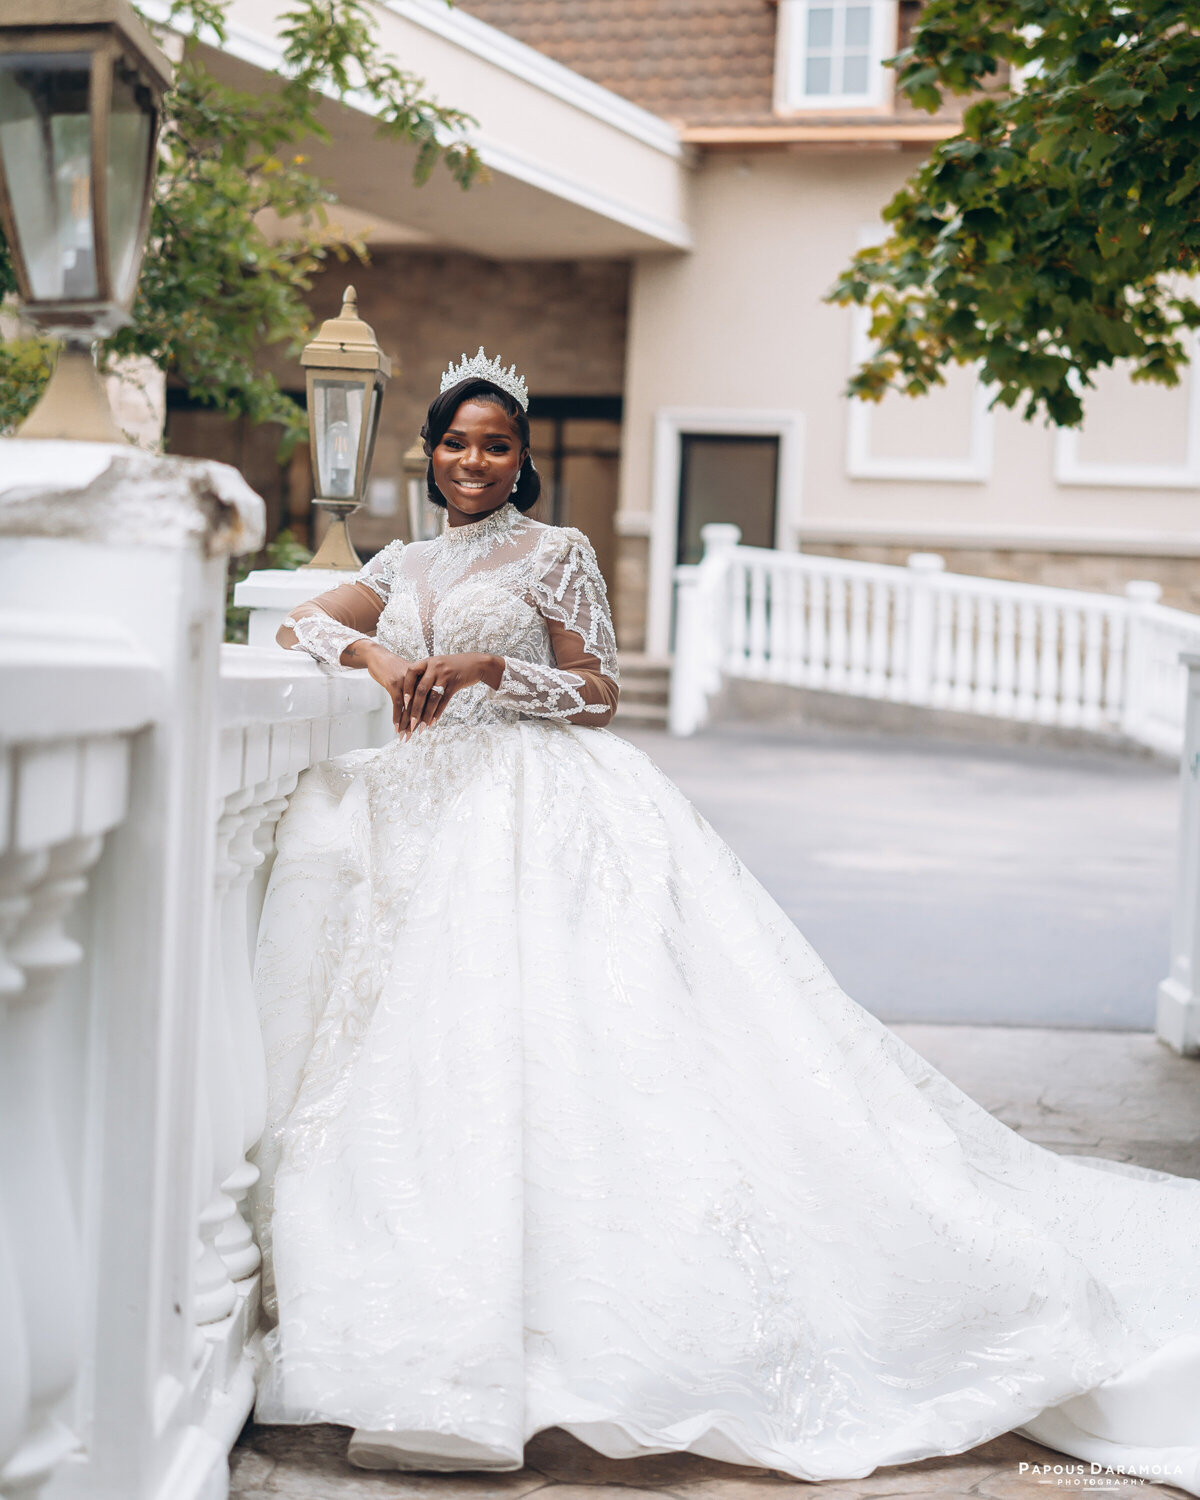 Abigail and Abije Oruka Events Papouse photographer Wedding event planners Toronto planner African Nigerian Eyitayo Dada Dara Ayoola outdoor ceremony floral princess ballgown rolls royce groom suit potraits  paradise banquet hall vaughn 196